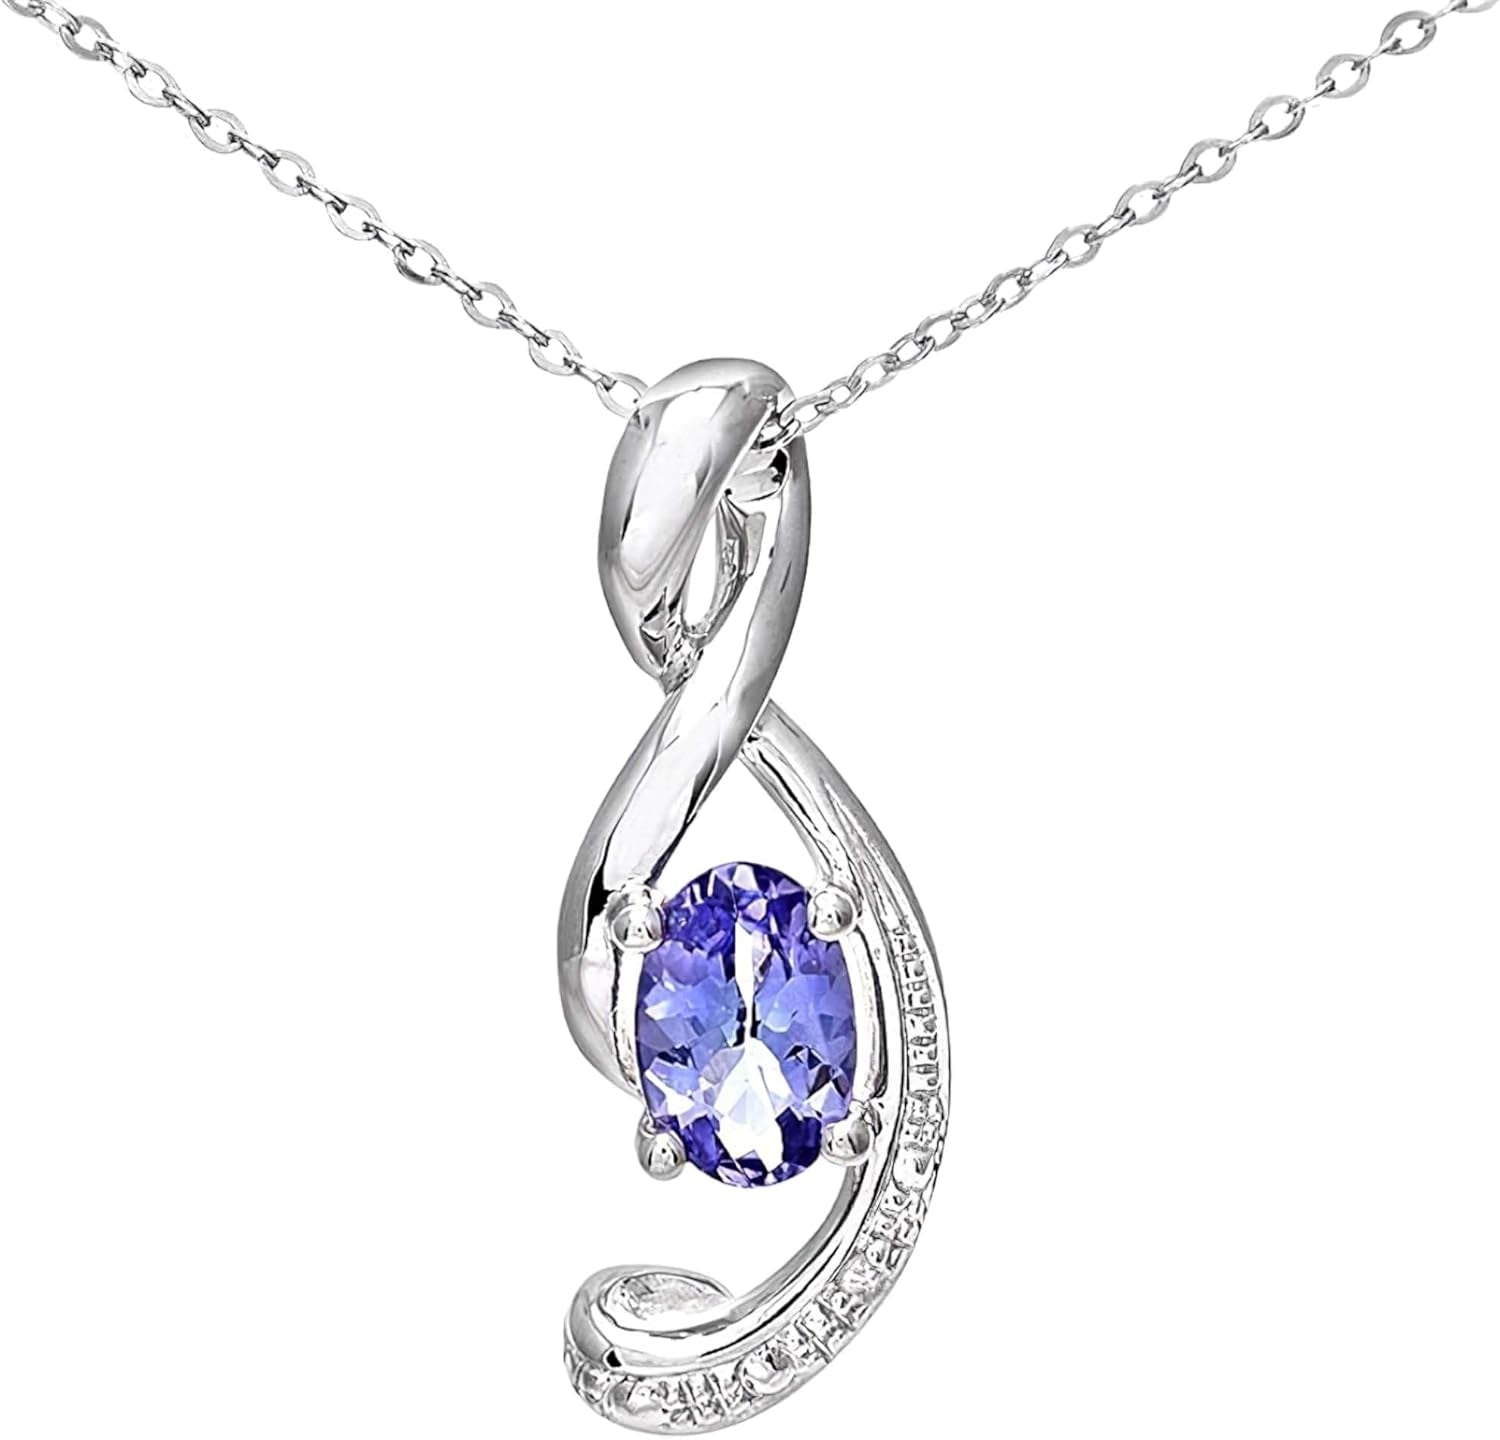 9Ct White Gold Diamond Pendant with Chain of 46Cm